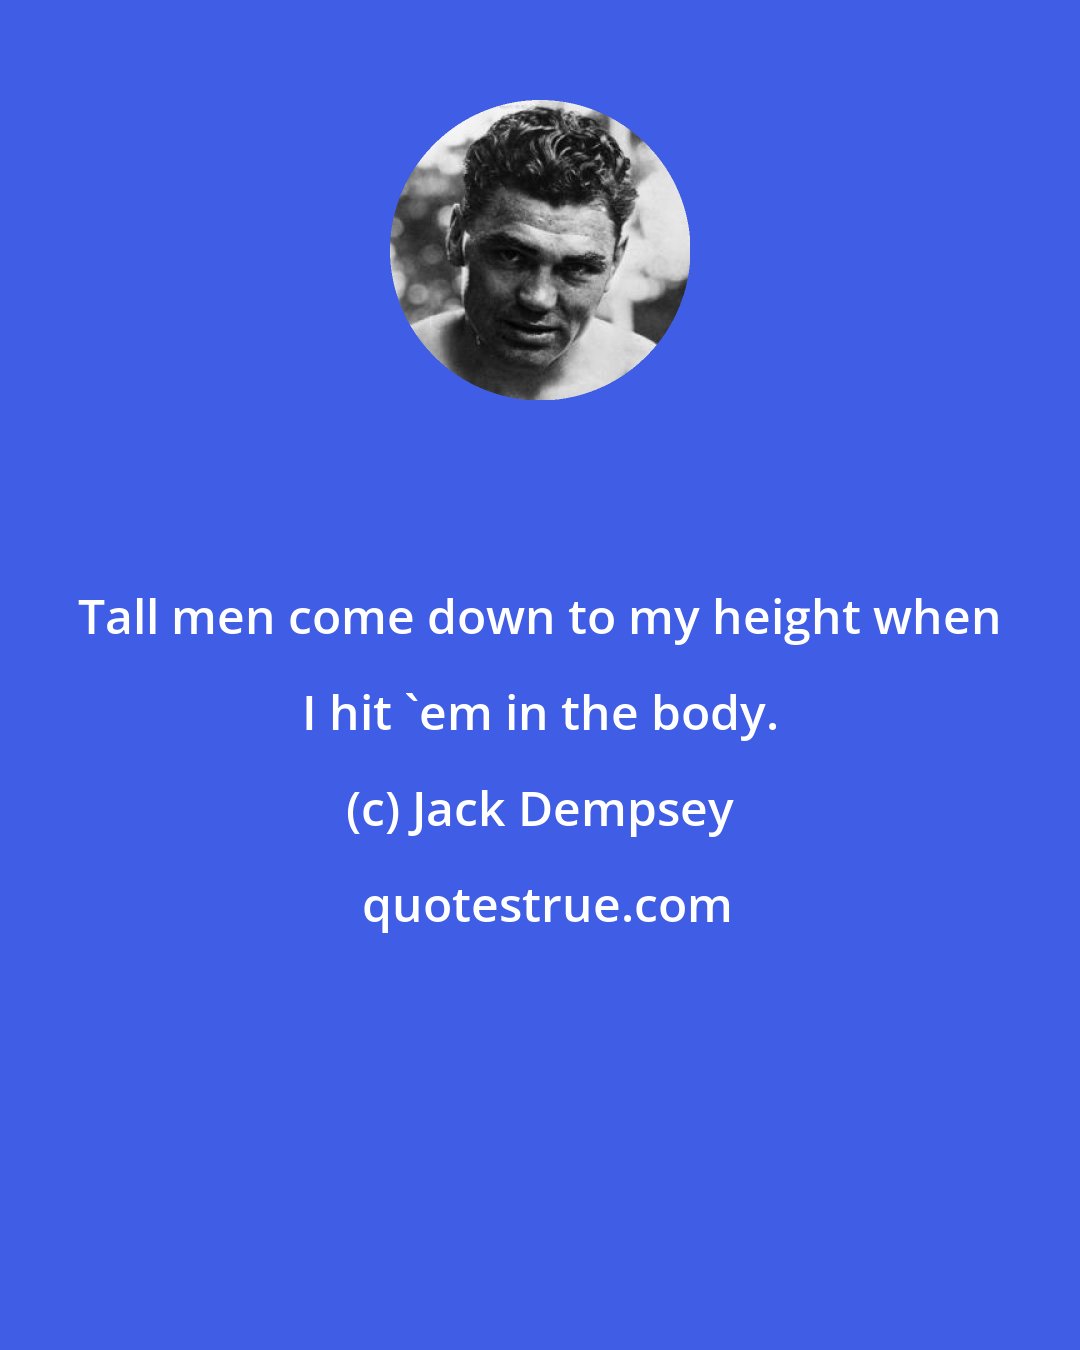 Jack Dempsey: Tall men come down to my height when I hit 'em in the body.